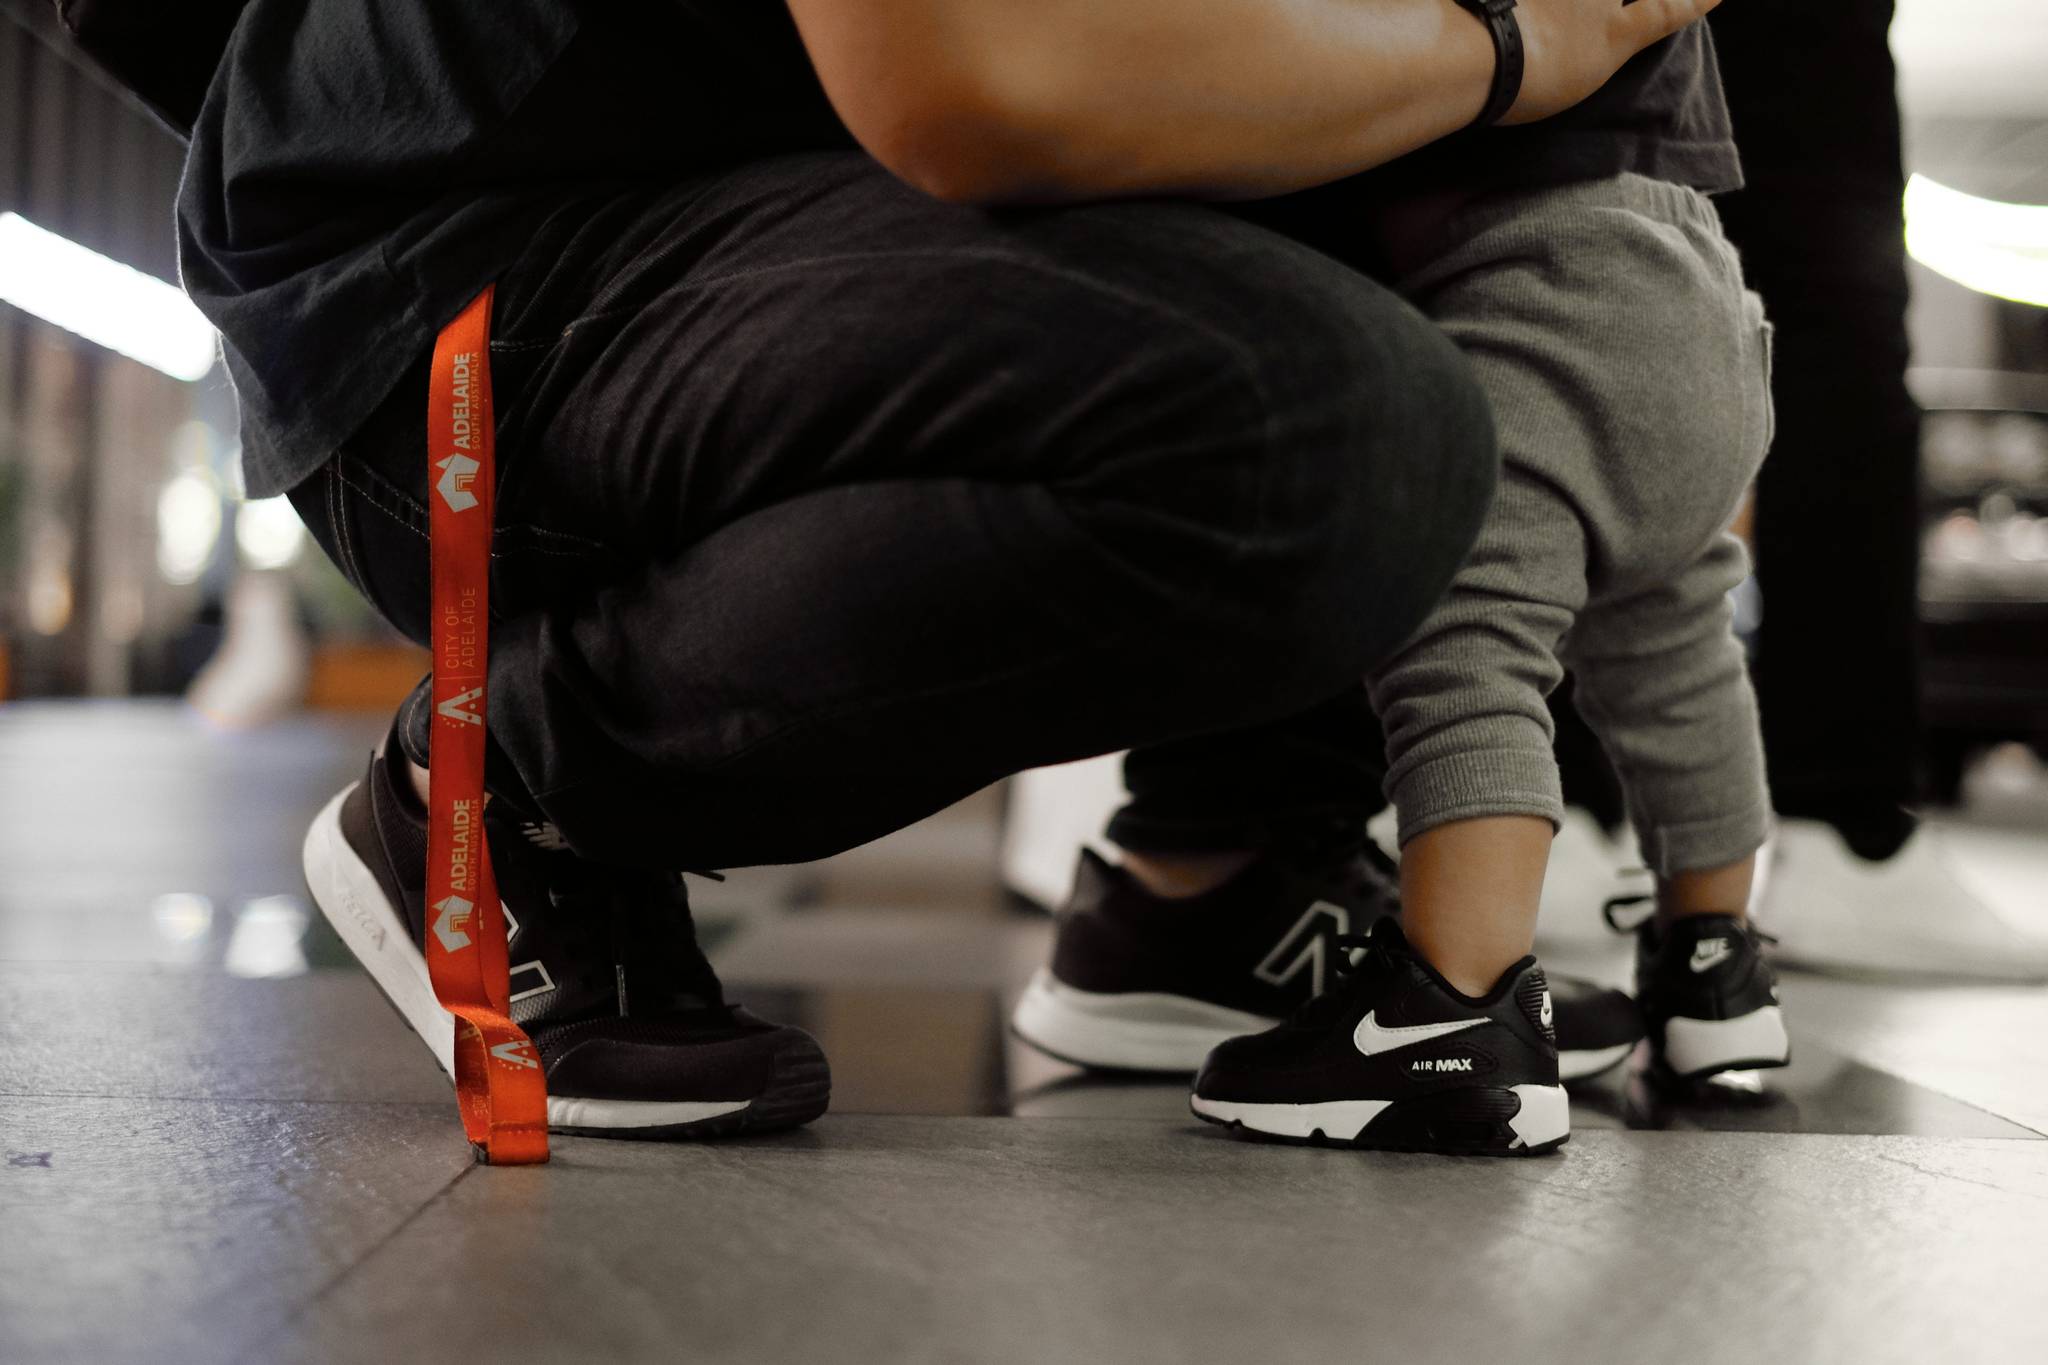 Nike kids shoe subscription helps time-pressed parents